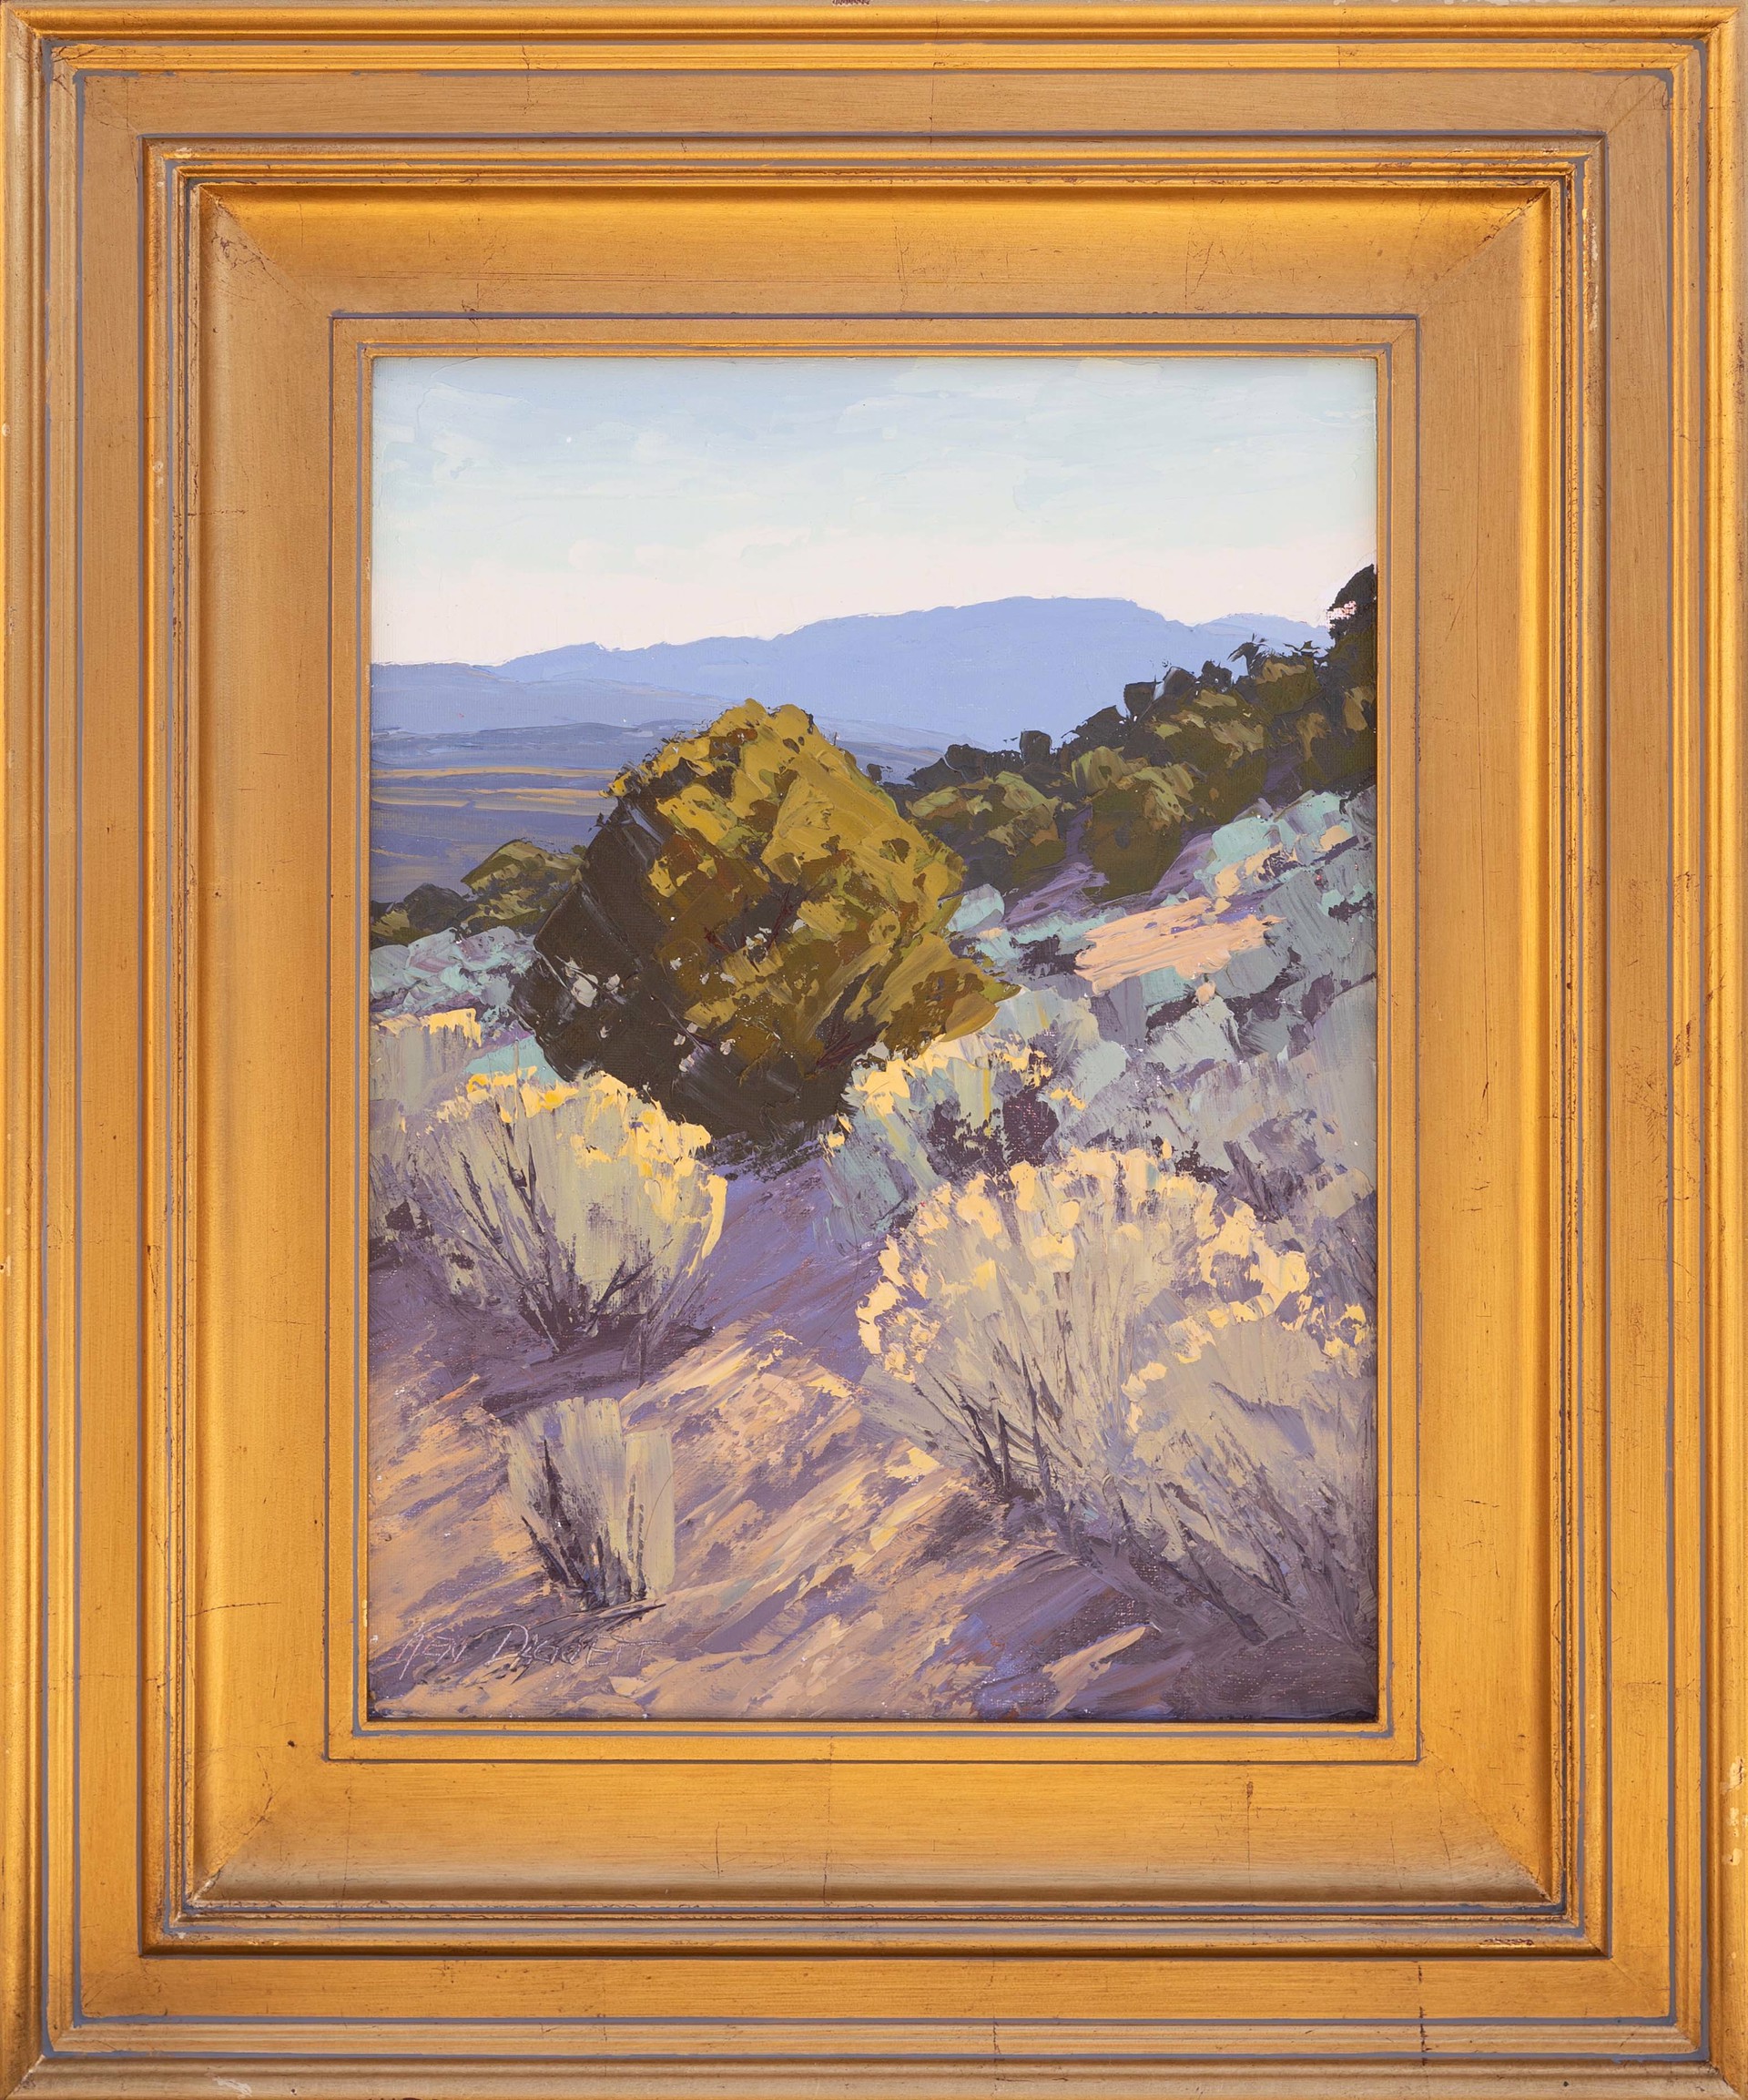 New Mexico Afternoon by Ken Daggett